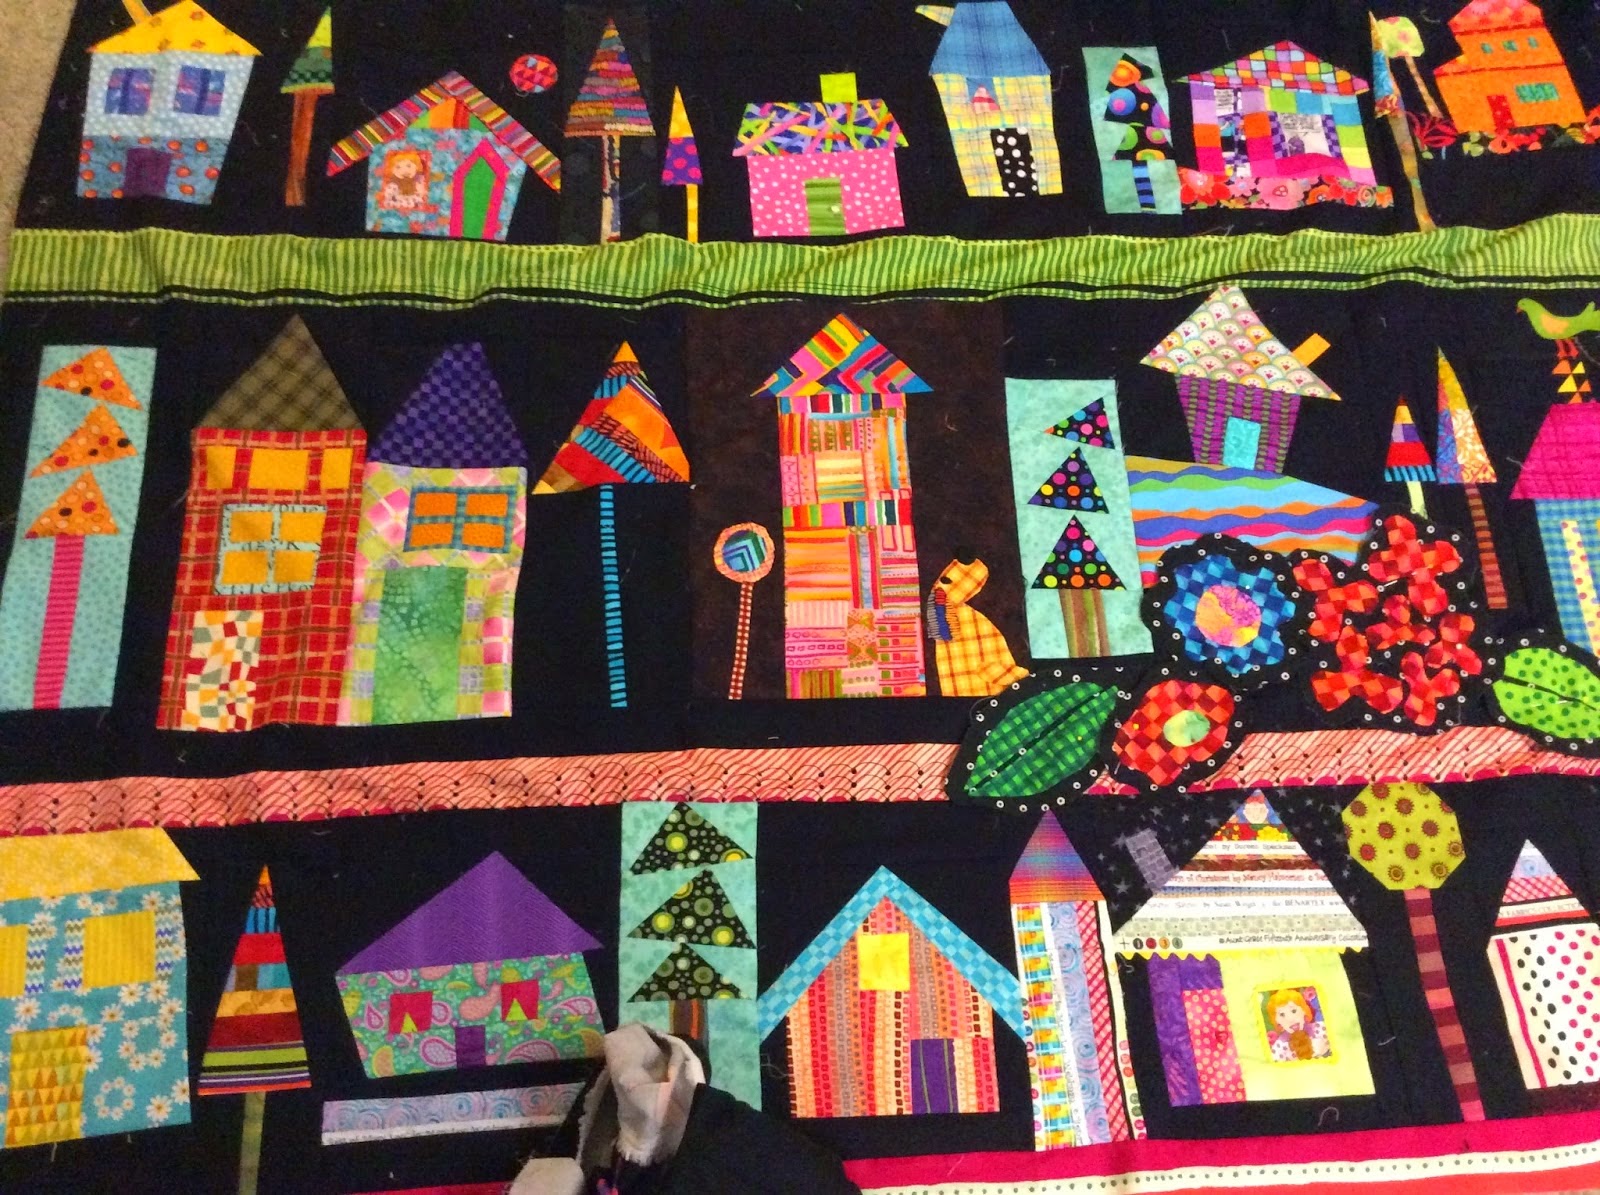 House quilt is done and quilted with fun details and whimsical things to smile at